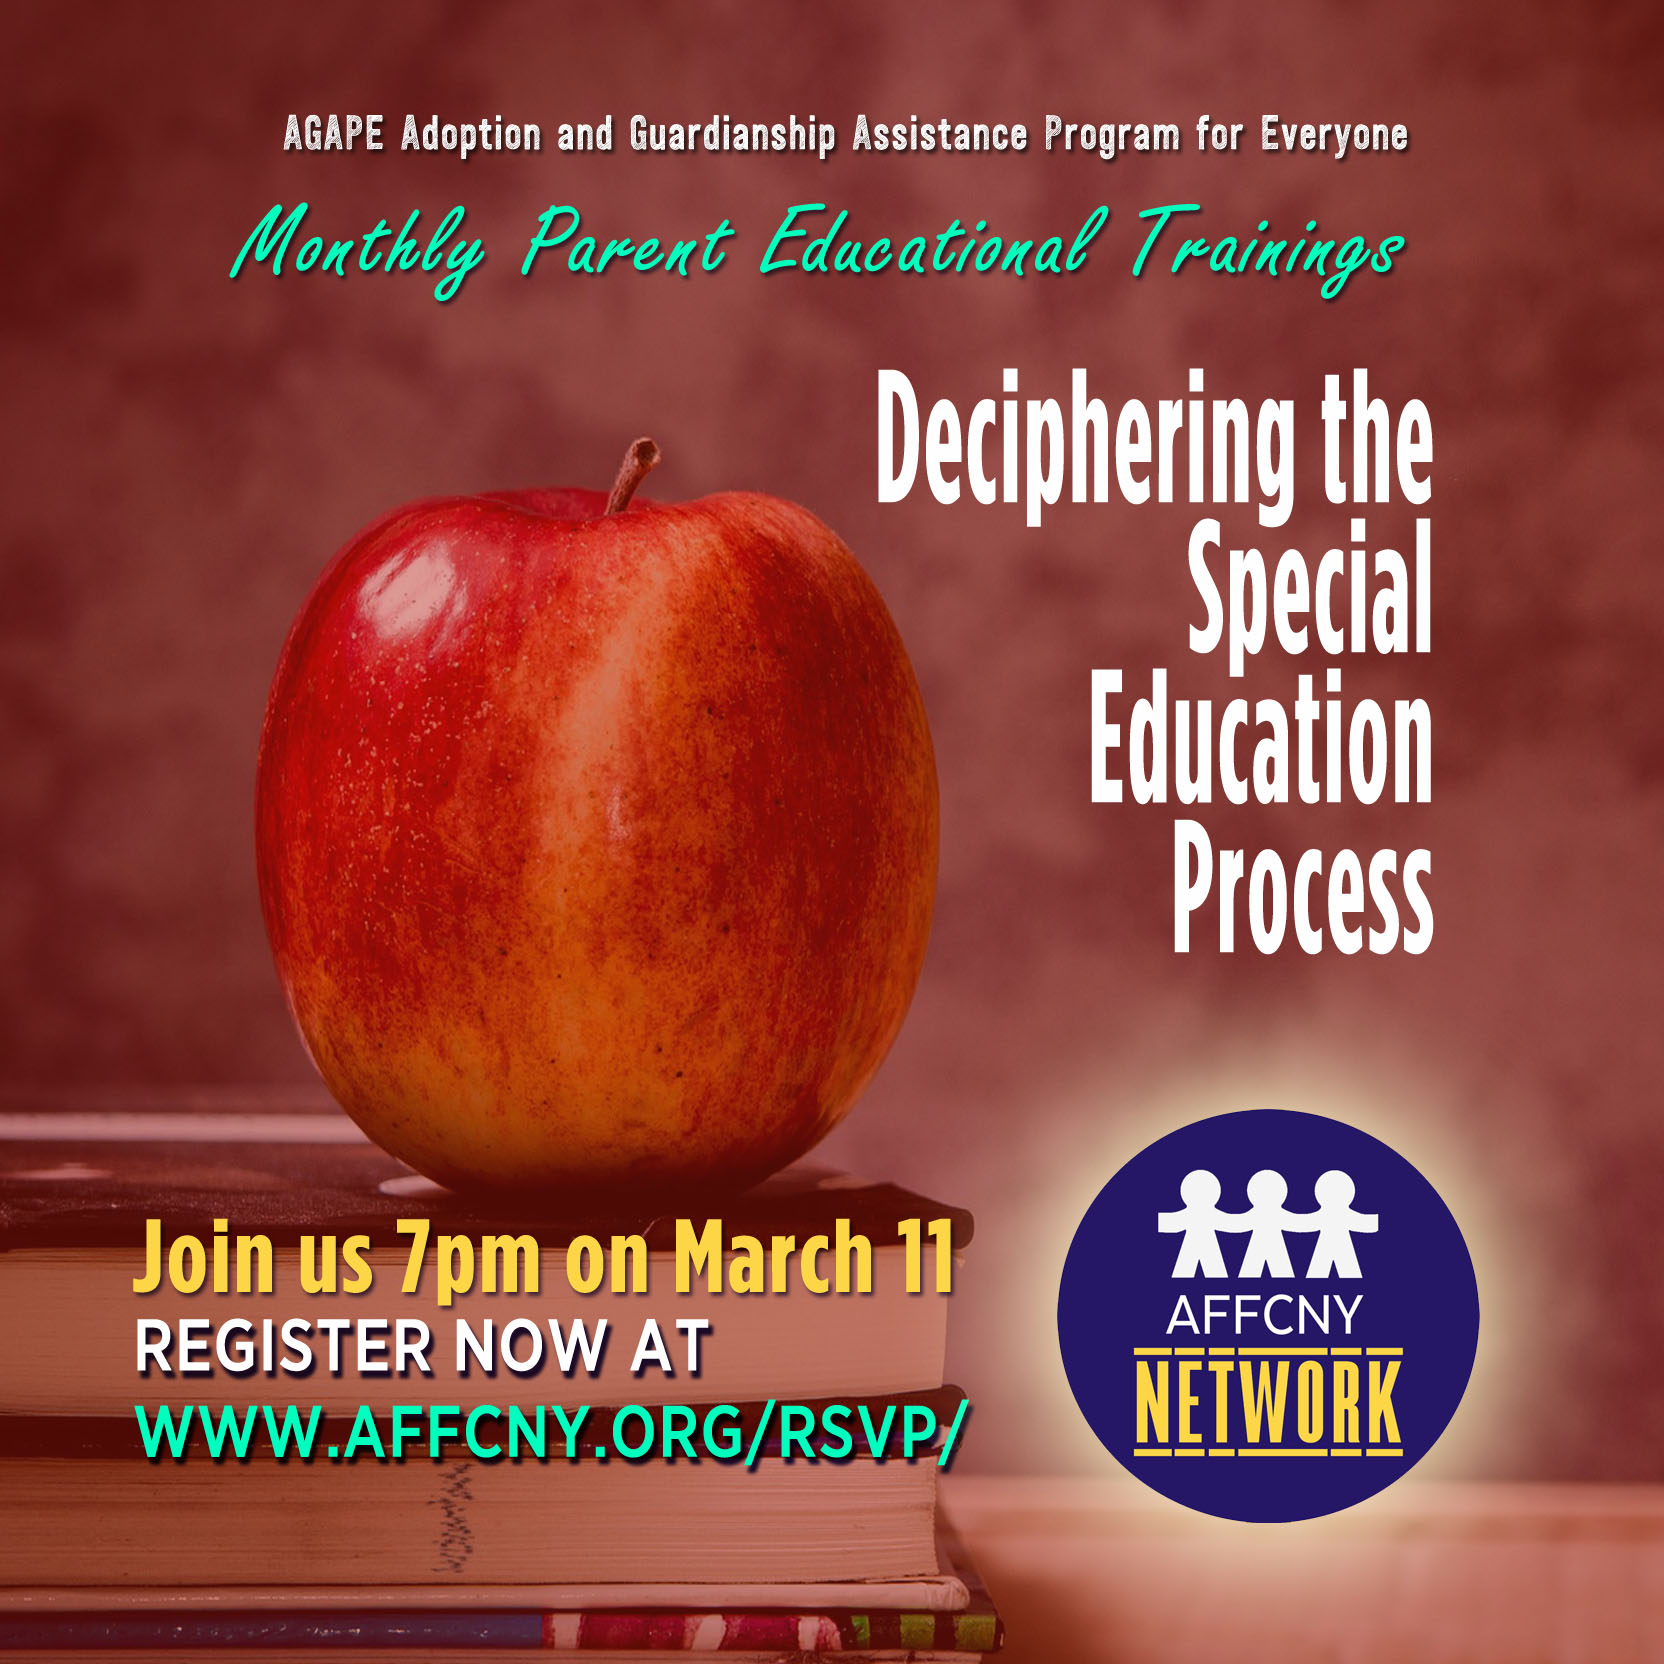 Join us March 11th as we decipher the Special Education Process.